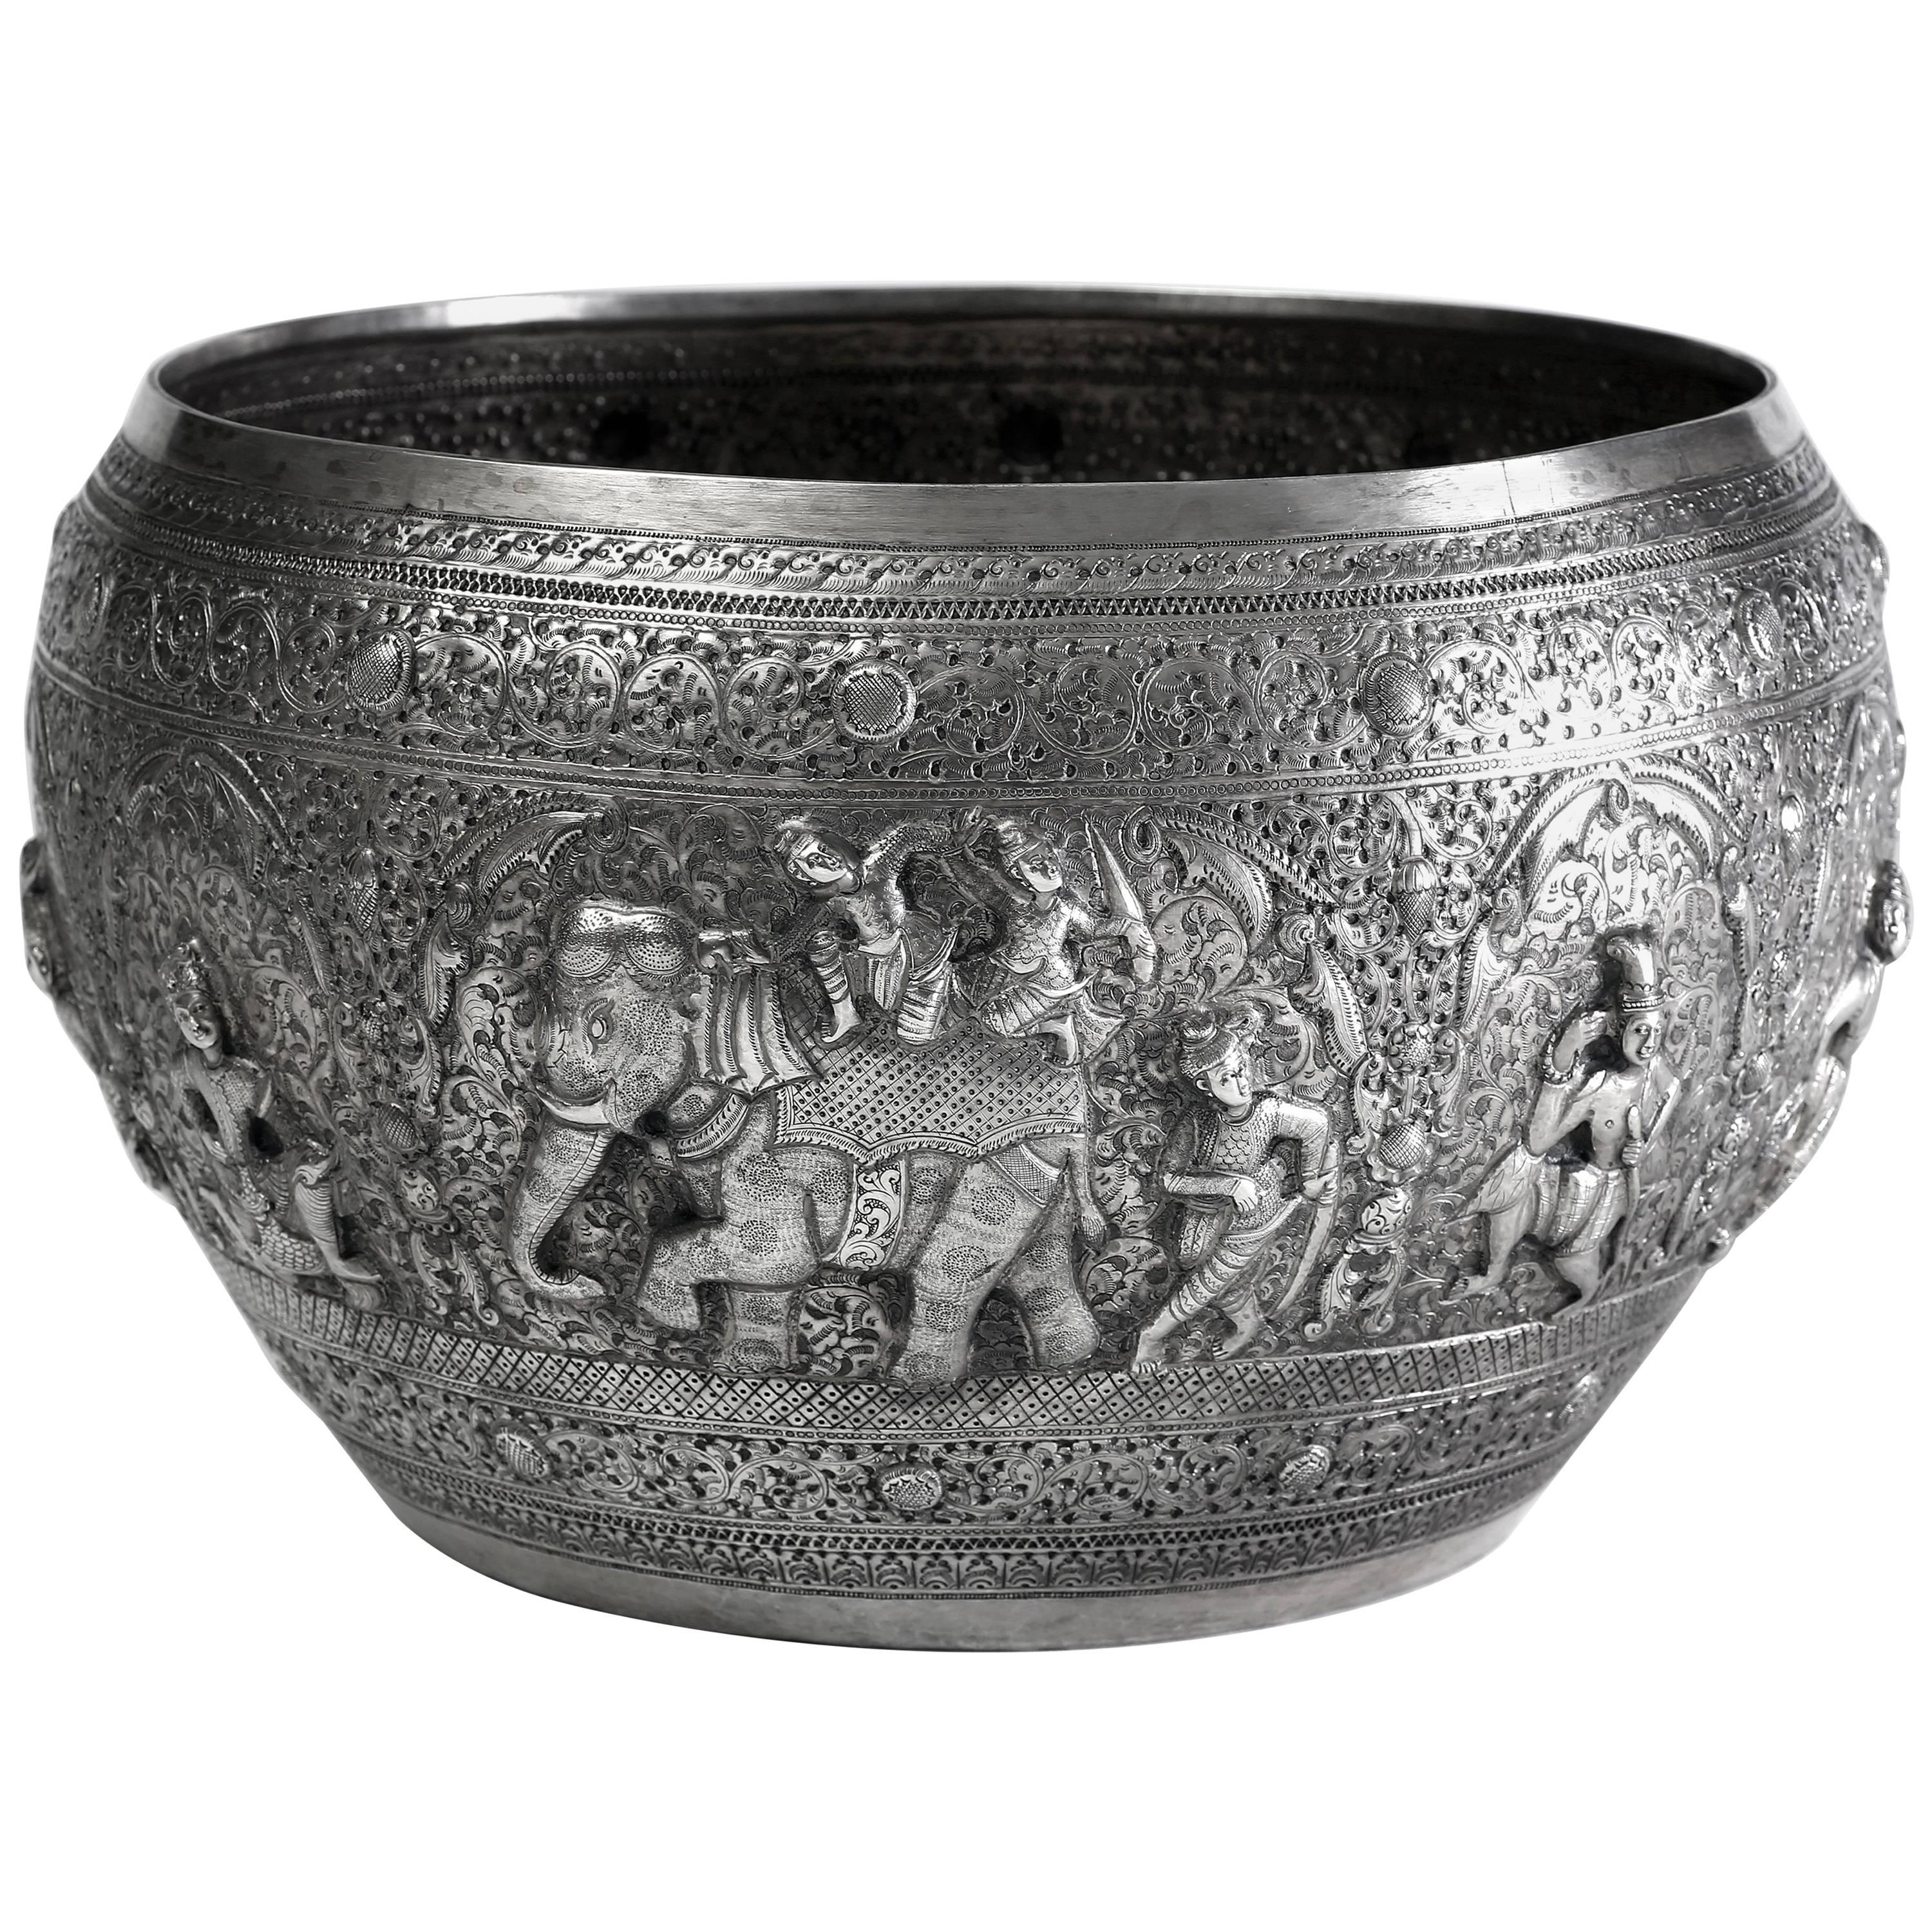 Hand-Worked Solid Silver Burmese Ceremonial Bowl, High Relief Jataka Scenes